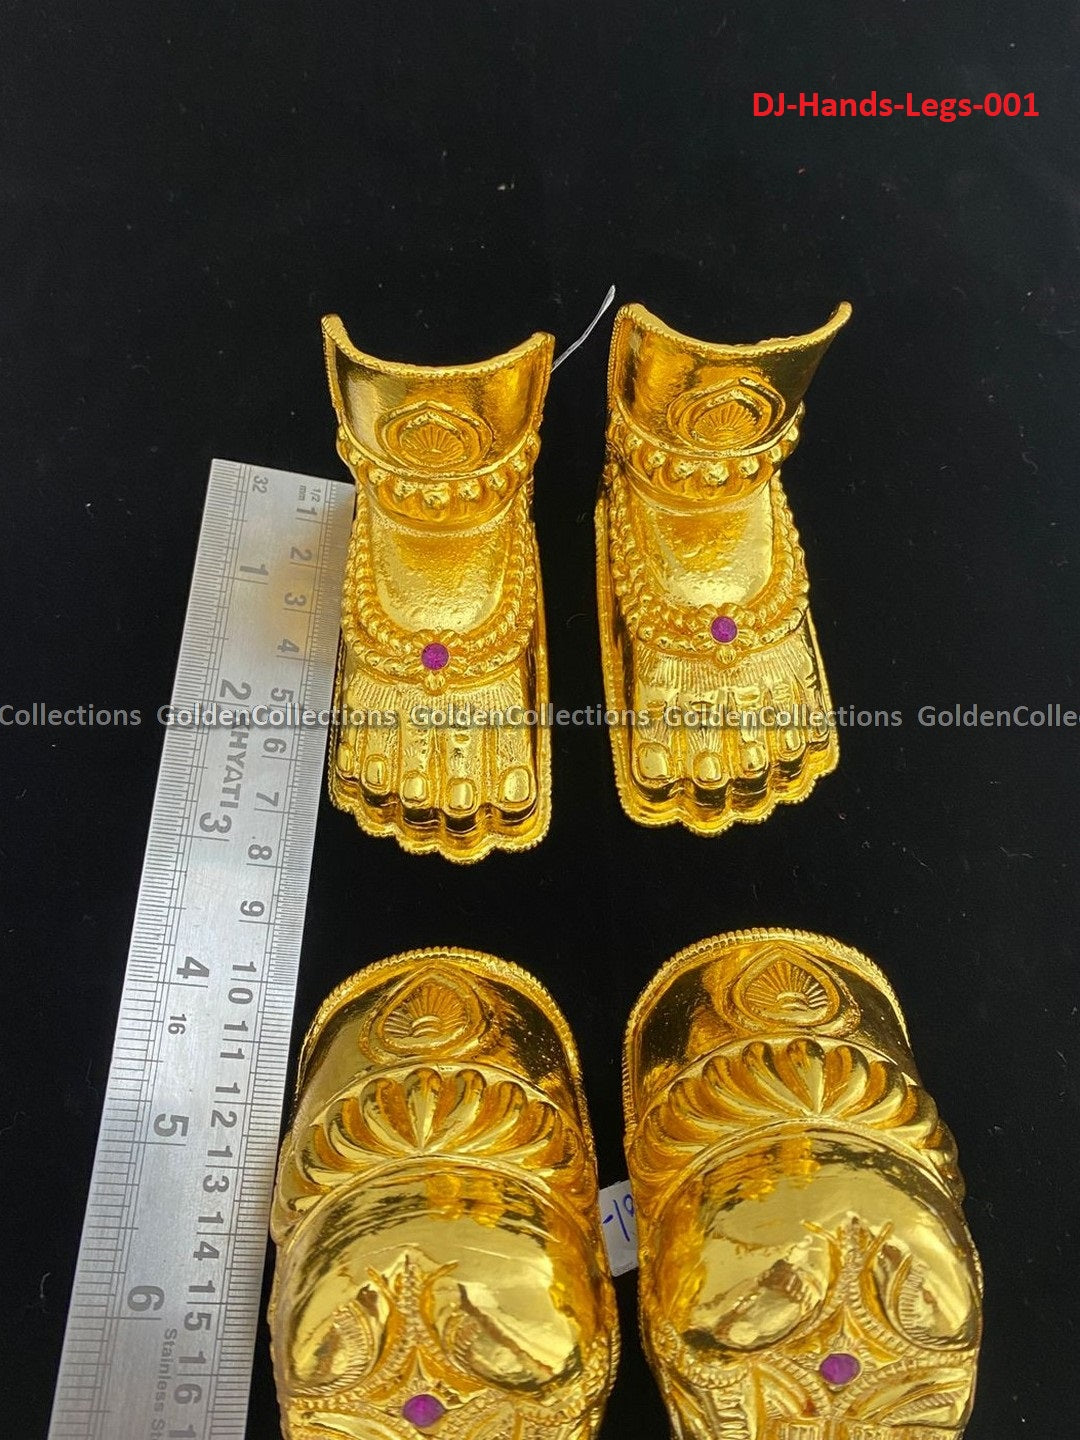 Gold Plated Hands and Legs Hastam Padam for Varalakshmi Doll | GoldenCollections 3